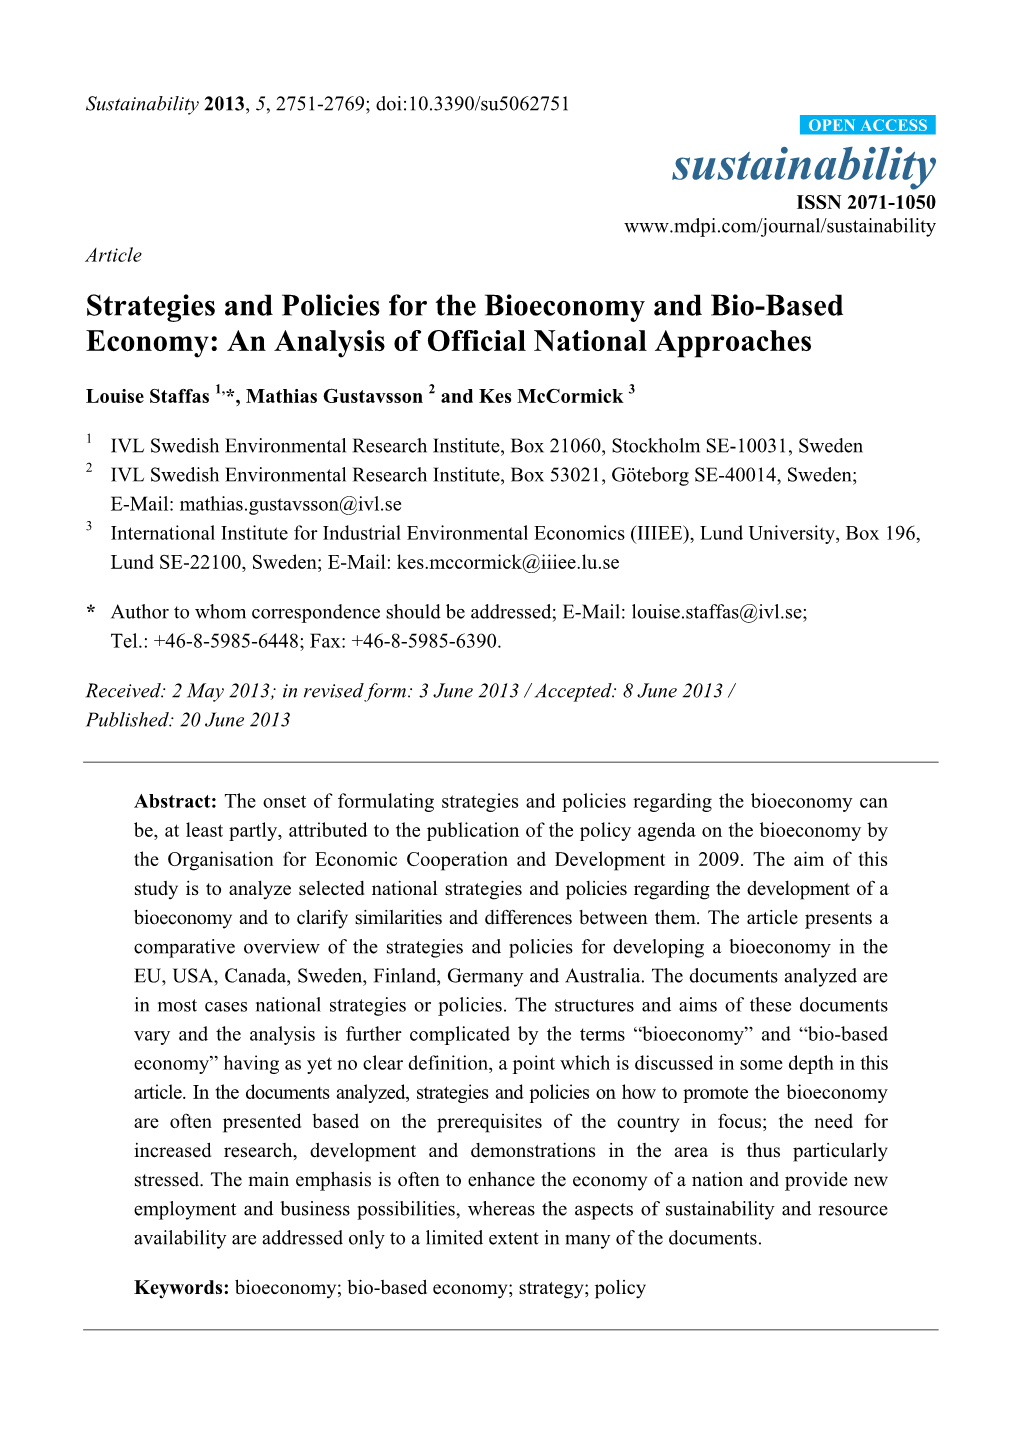 Strategies and Policies for the Bioeconomy and Bio-Based Economy: an Analysis of Official National Approaches